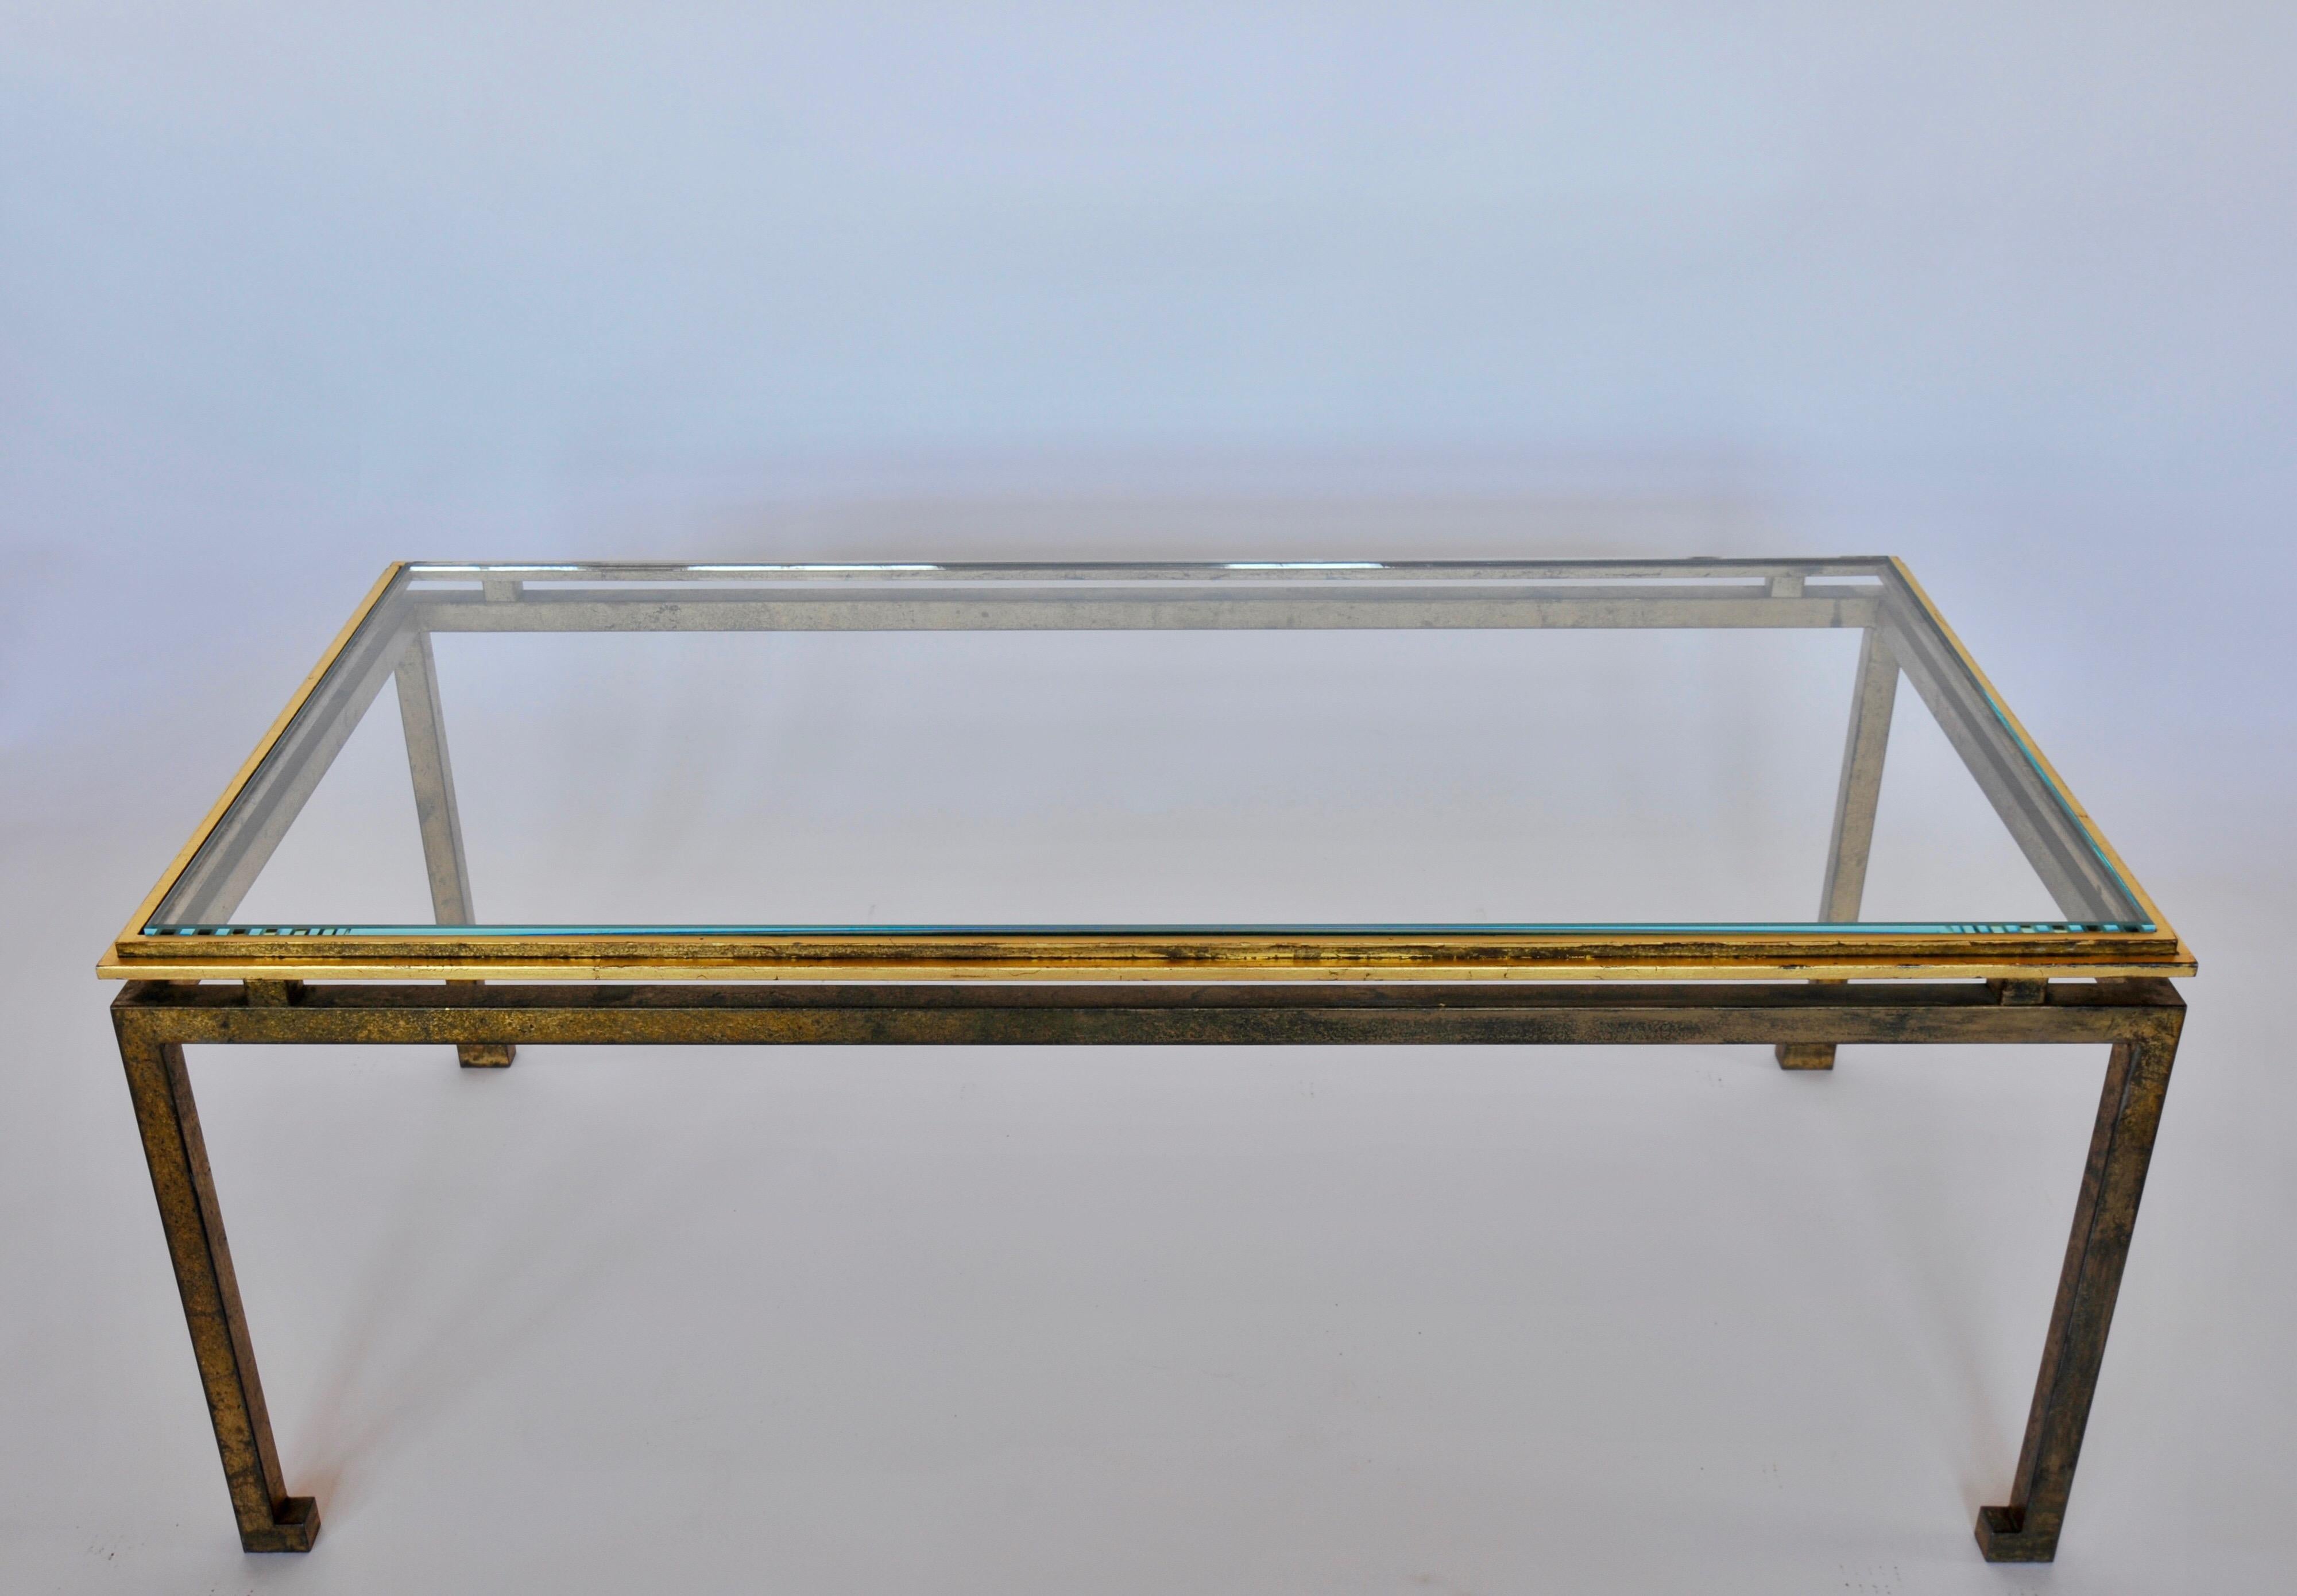 Elegant, timeless French Mid-Century Modern neoclassical, gilt iron coffee table by Maison Ramsay. 

The table features Classic Ramsay details such as turned in feet and a cantilevered top suspended over the frame and legs via 4 gilt iron spacers.